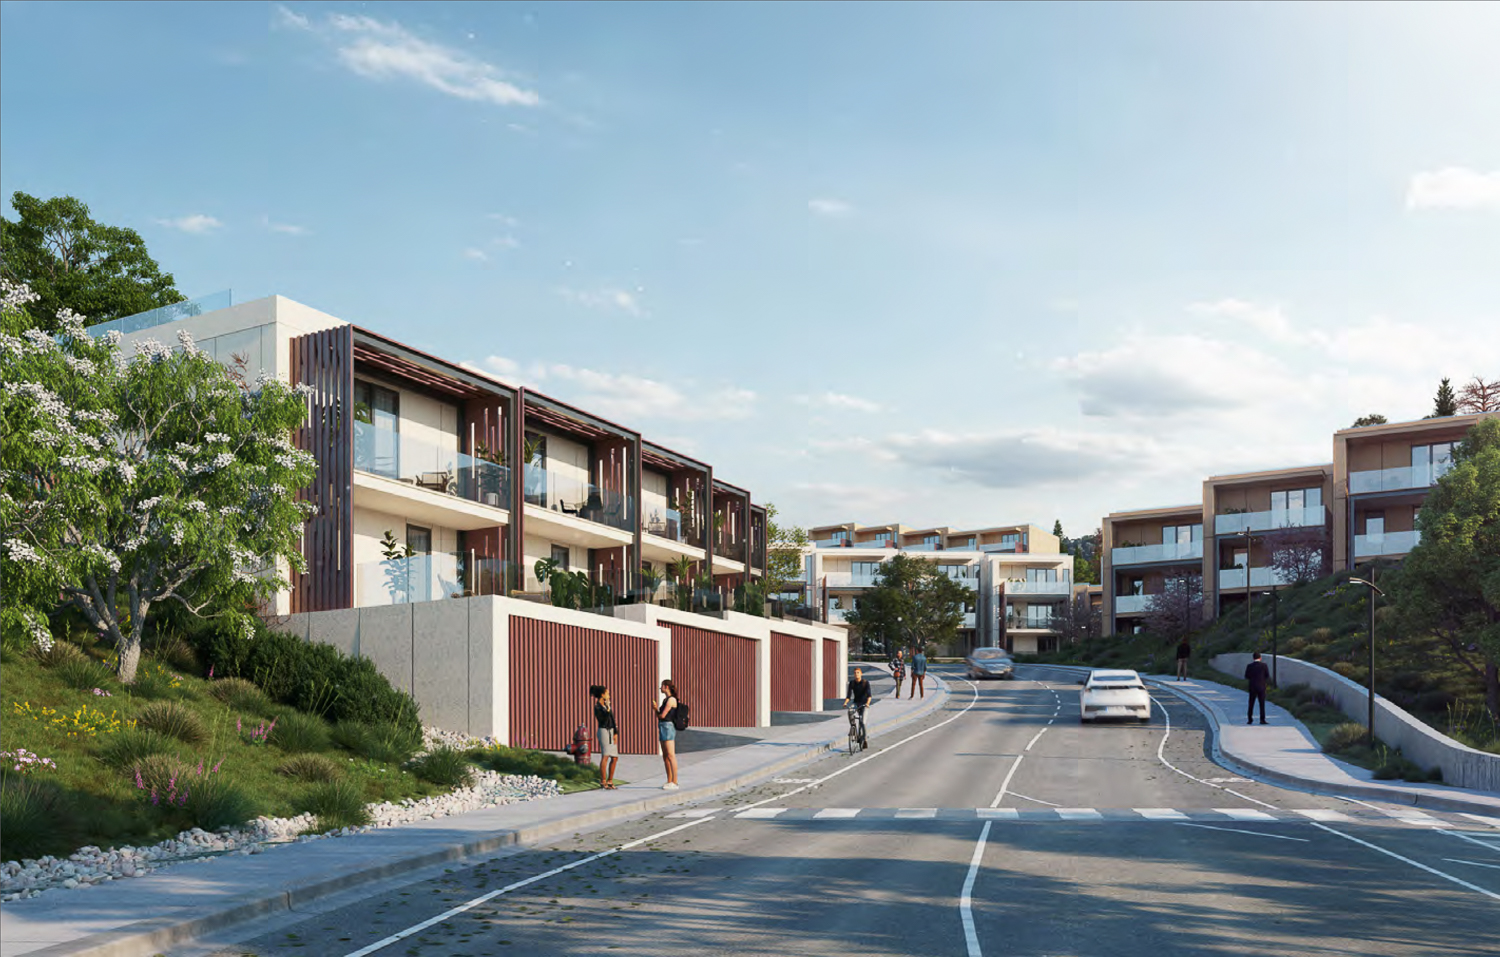 808 Alameda Townhomes street view, rendering by Lowney Architecture